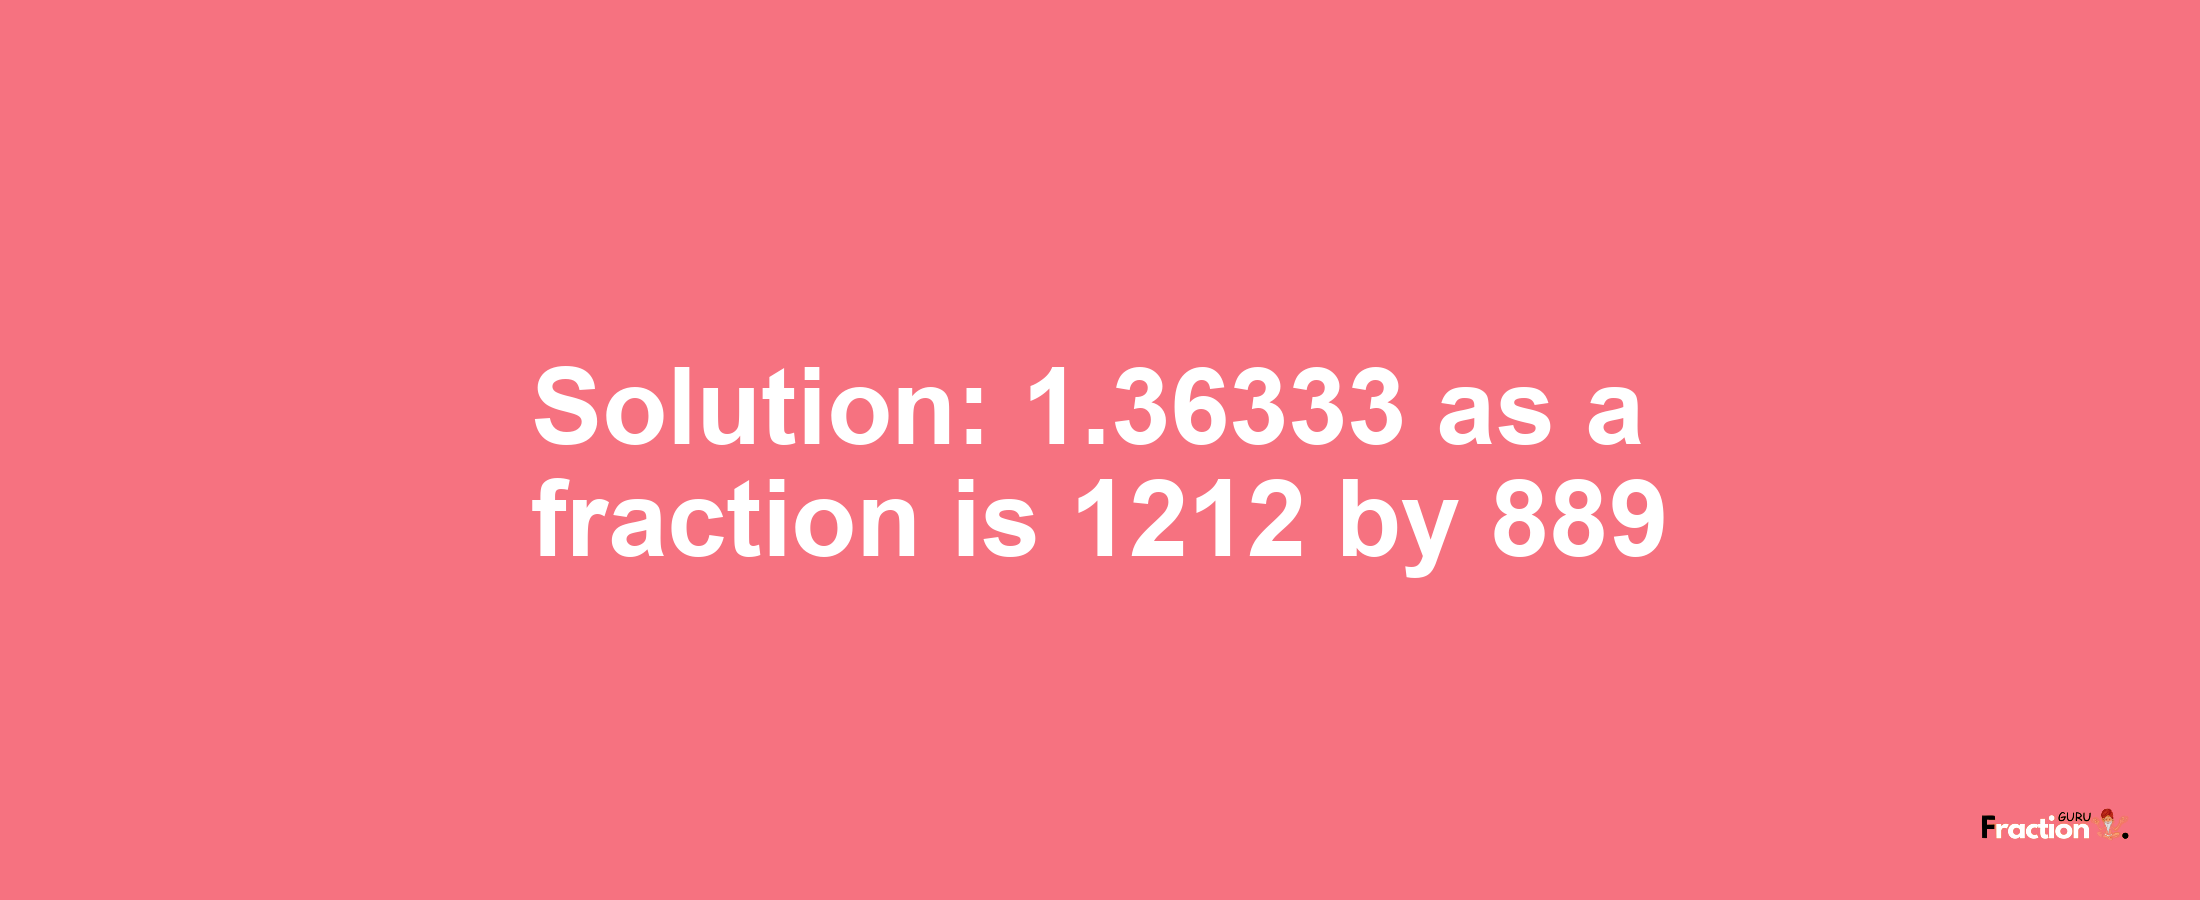 Solution:1.36333 as a fraction is 1212/889